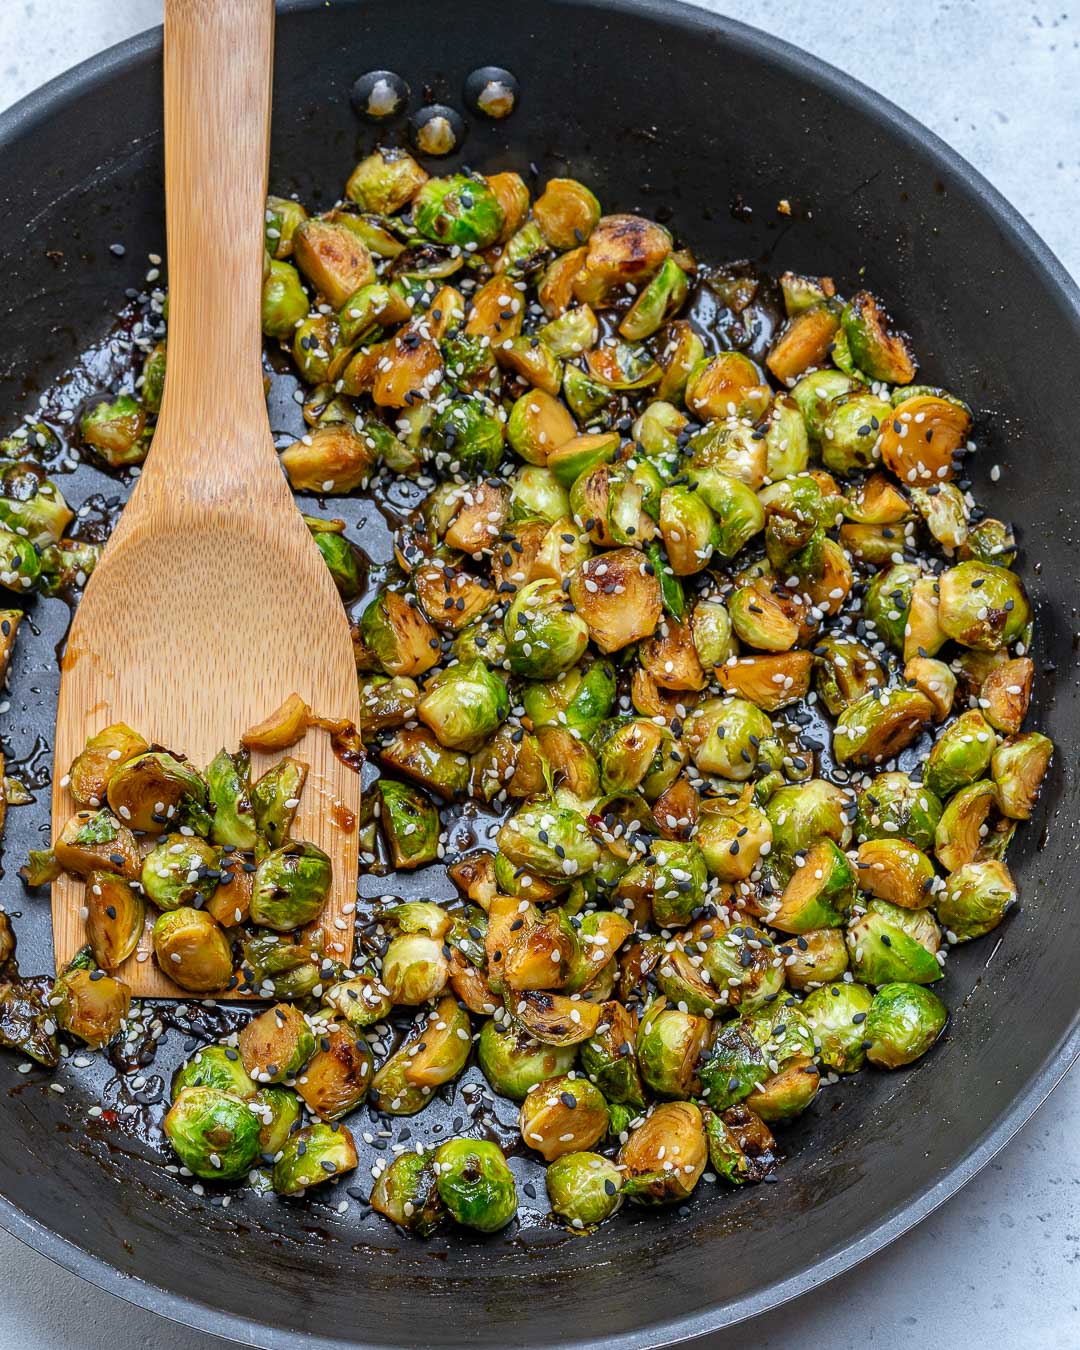 Stir fried Brussels Sprouts by Rachel Maser